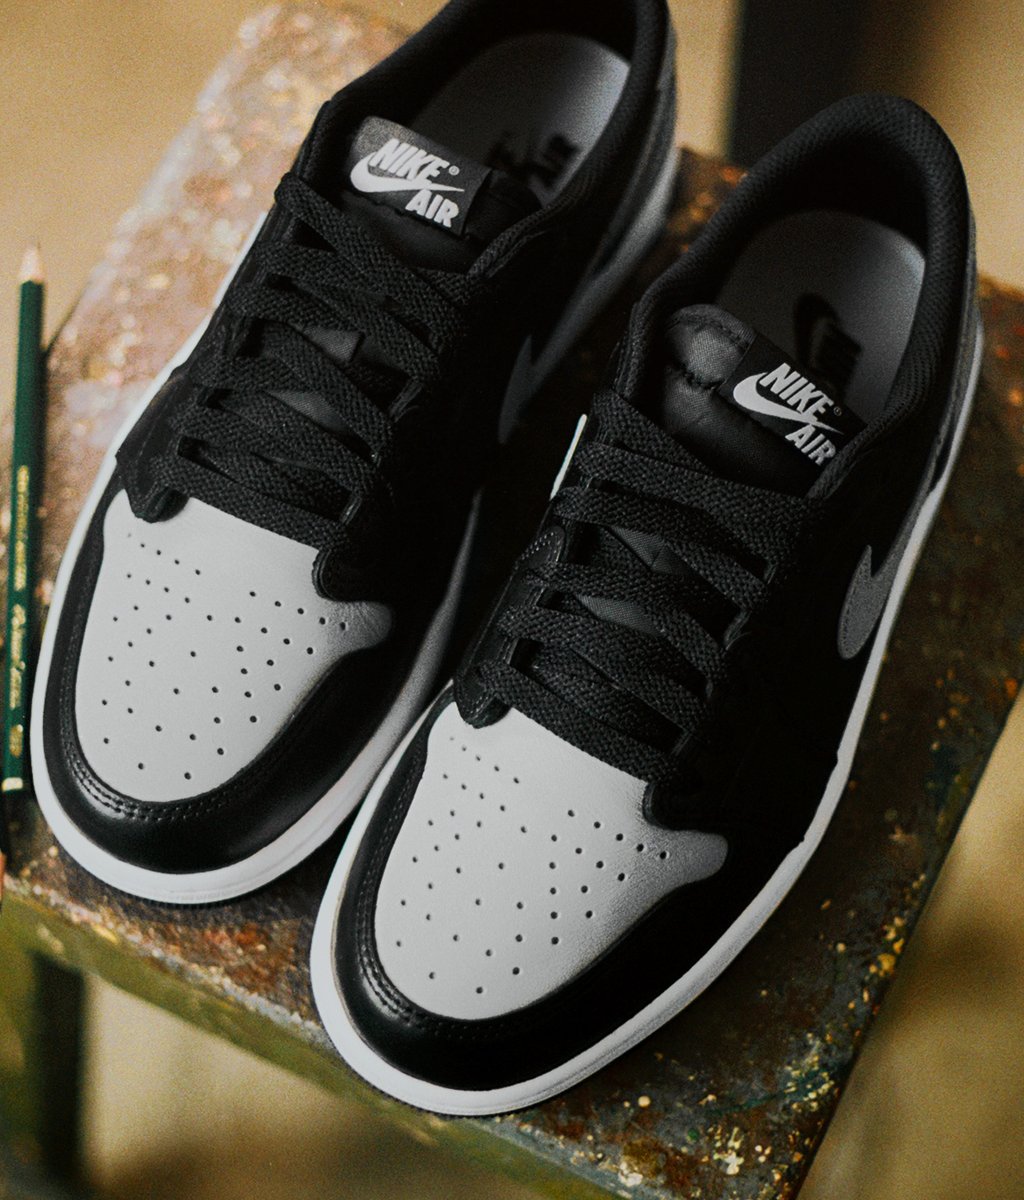 Icons inspire icons. The Jordan Retro 1 Low OG 'Shadow' launches 5/11 in men's sizing. Reserve your pair now in the Foot Locker app.